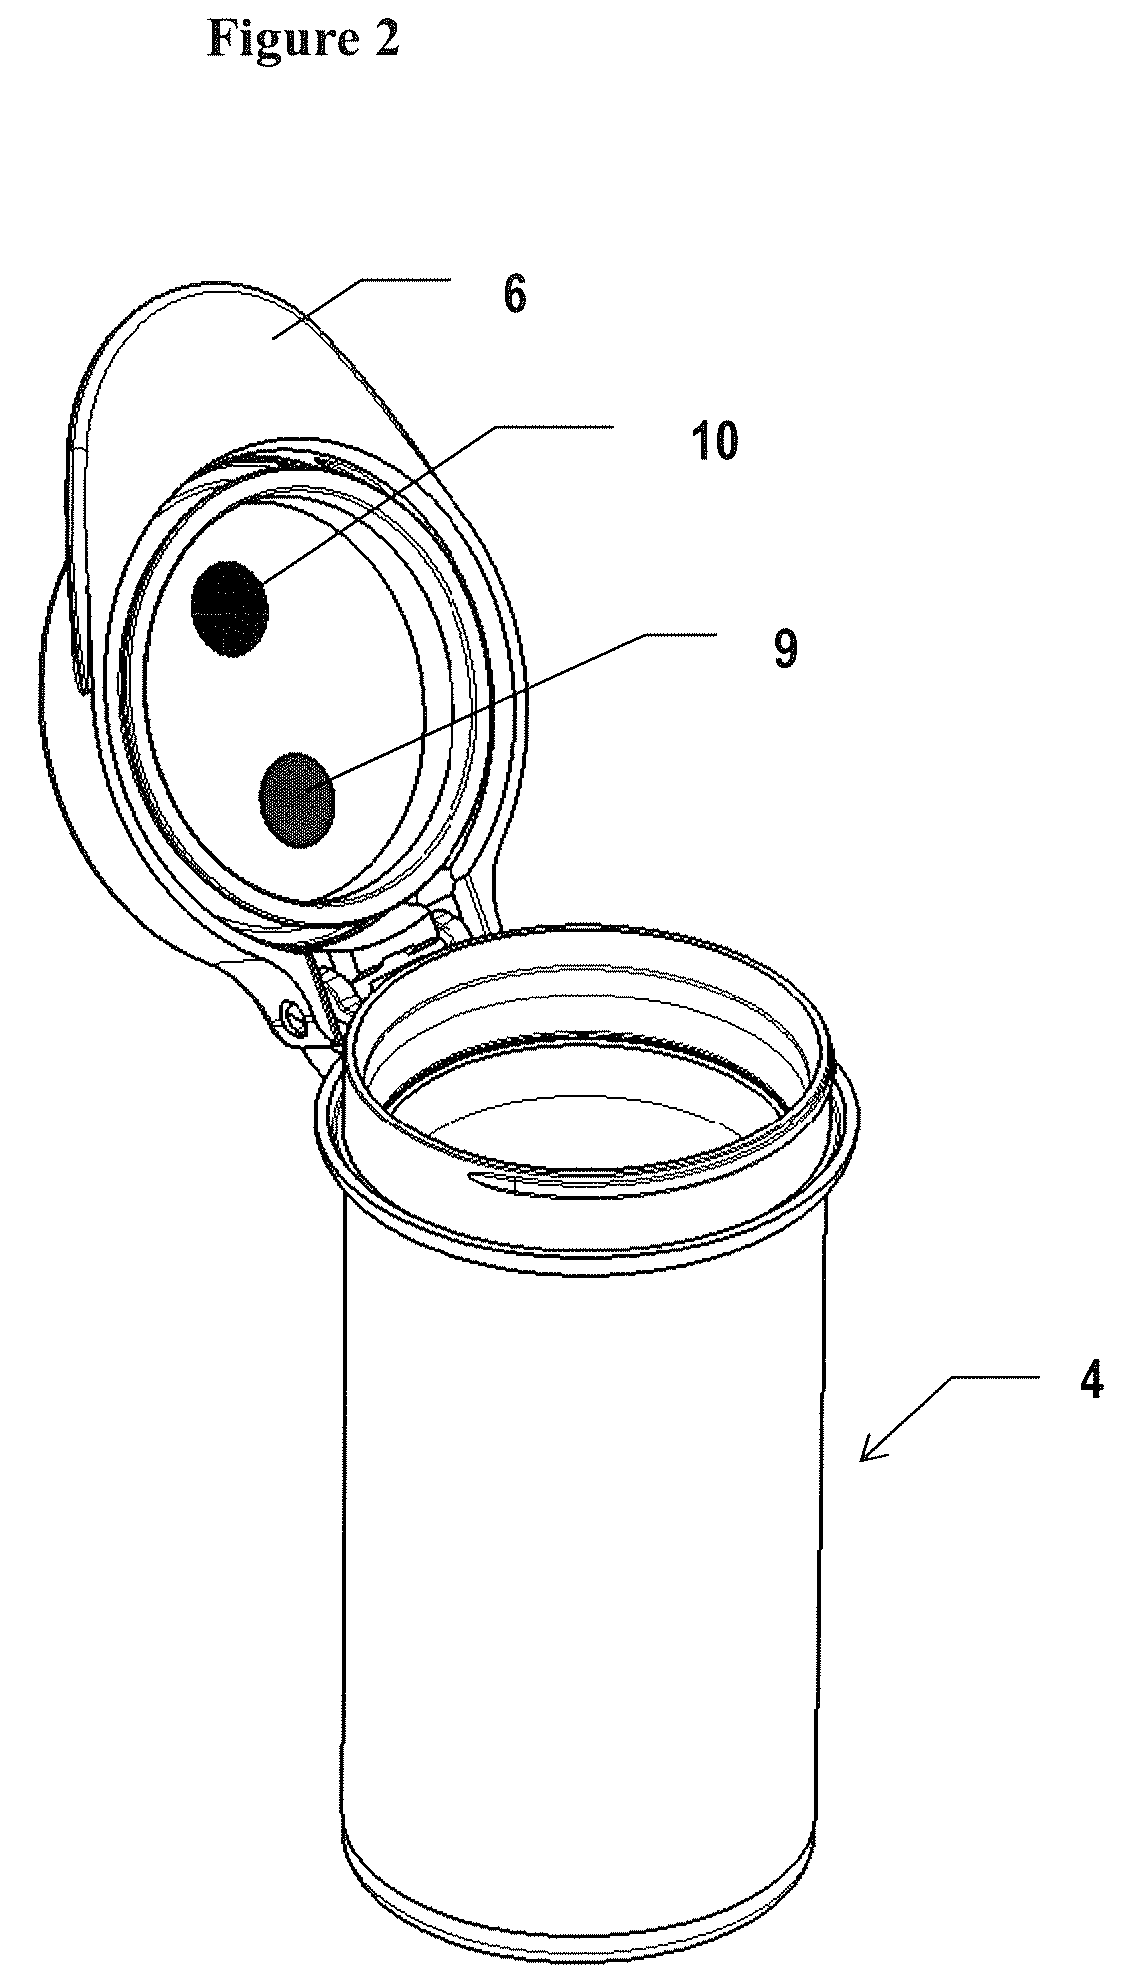 Dehydrating container comprising a humidity state indicator